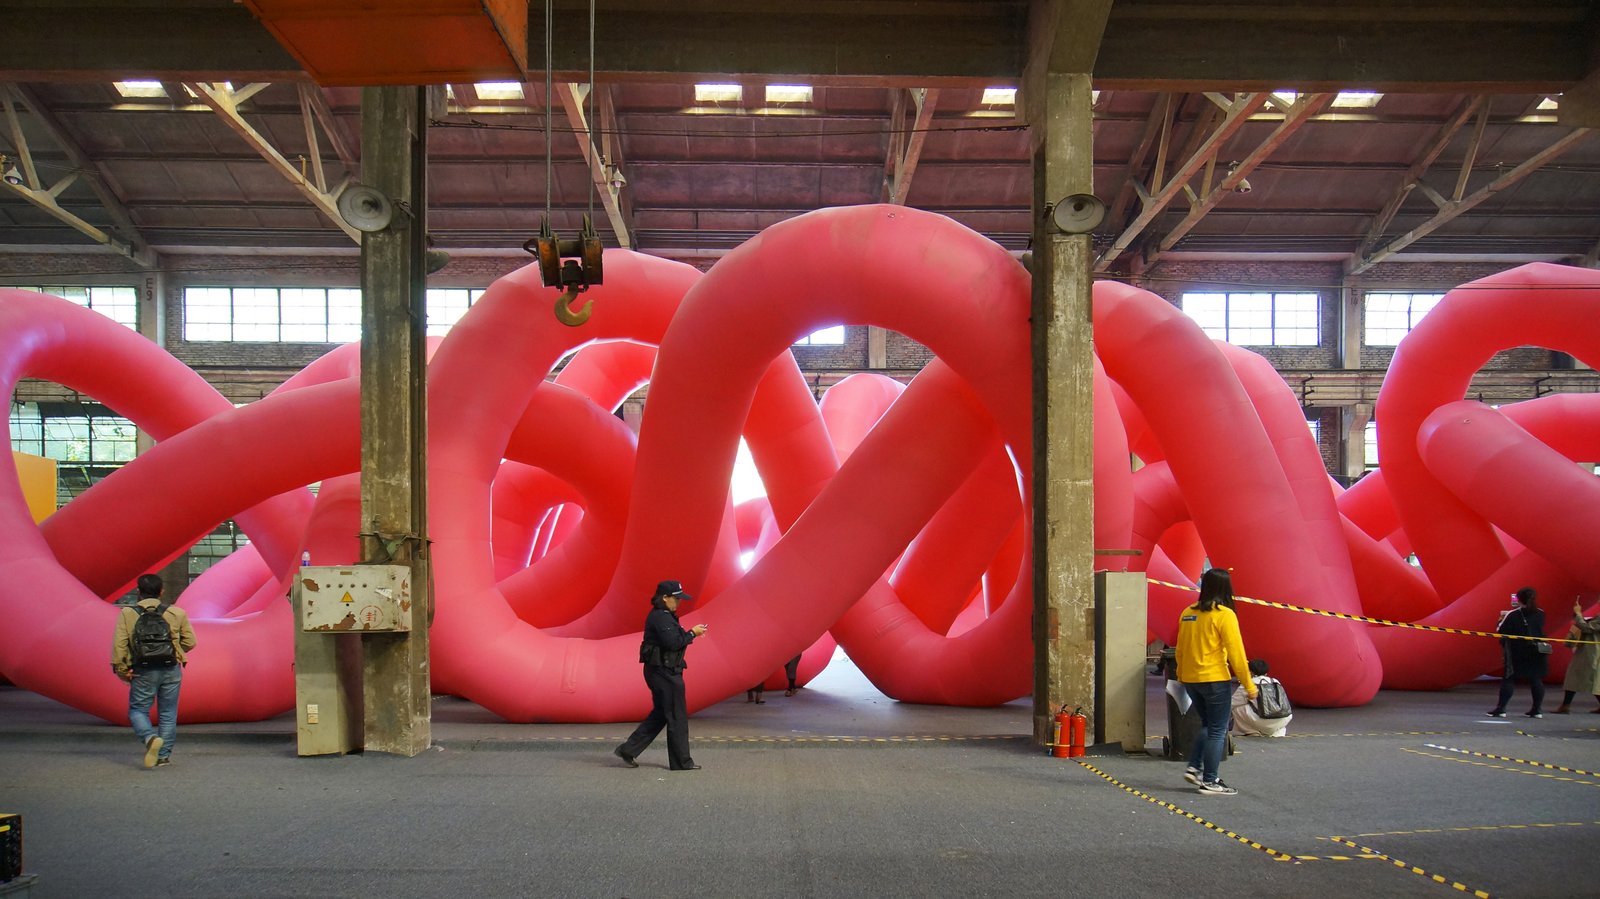 A vast pink knot in what looks to be an open public space with tall columns